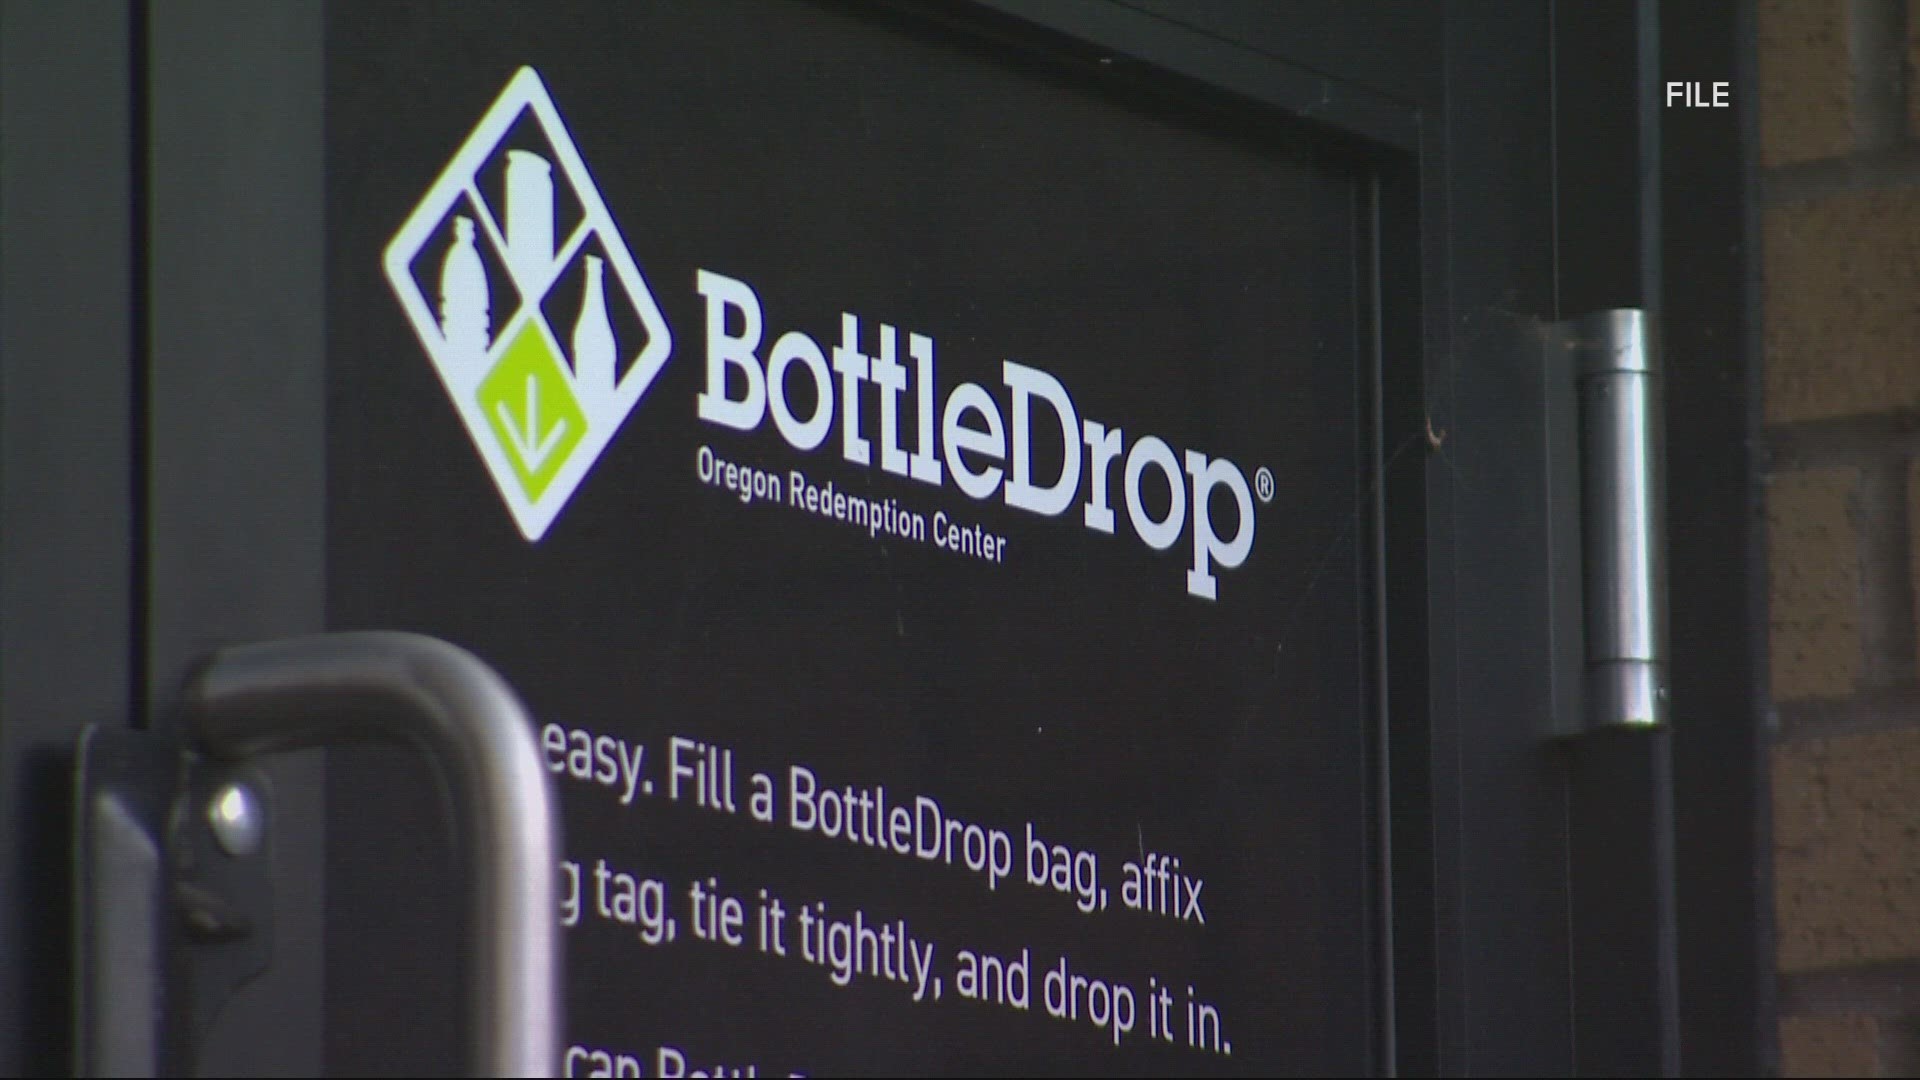 Two stores in downtown Portland will put a hold on taking bottles and can returns for 30 days in an effort to stop drug activity.